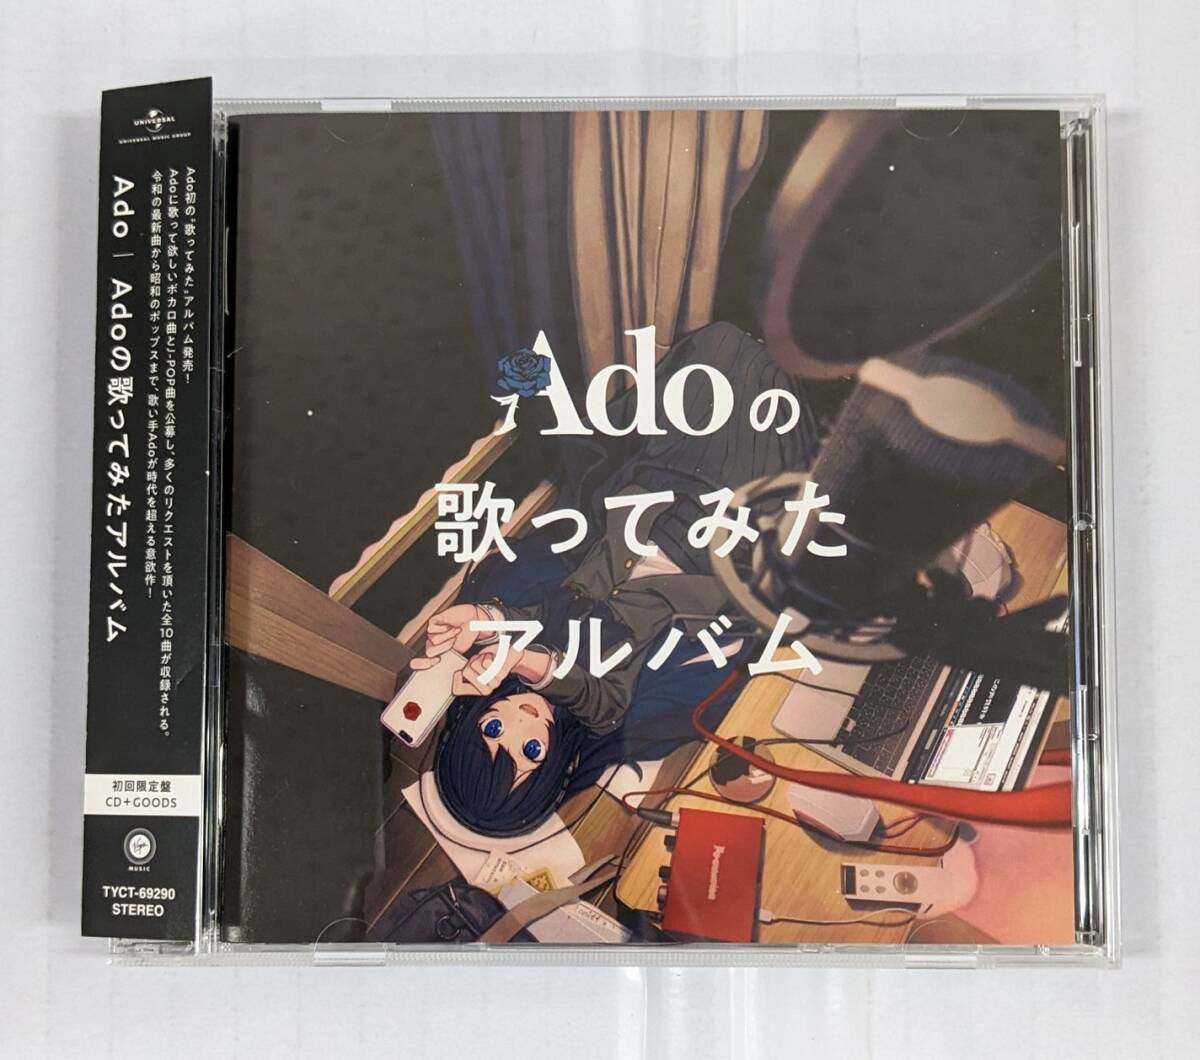 E02-2405 secondhand goods Ado Ado. .. temi . album the first times limitation record CD+GOODS dry flower / lovely .... other compilation * serial number lack of 